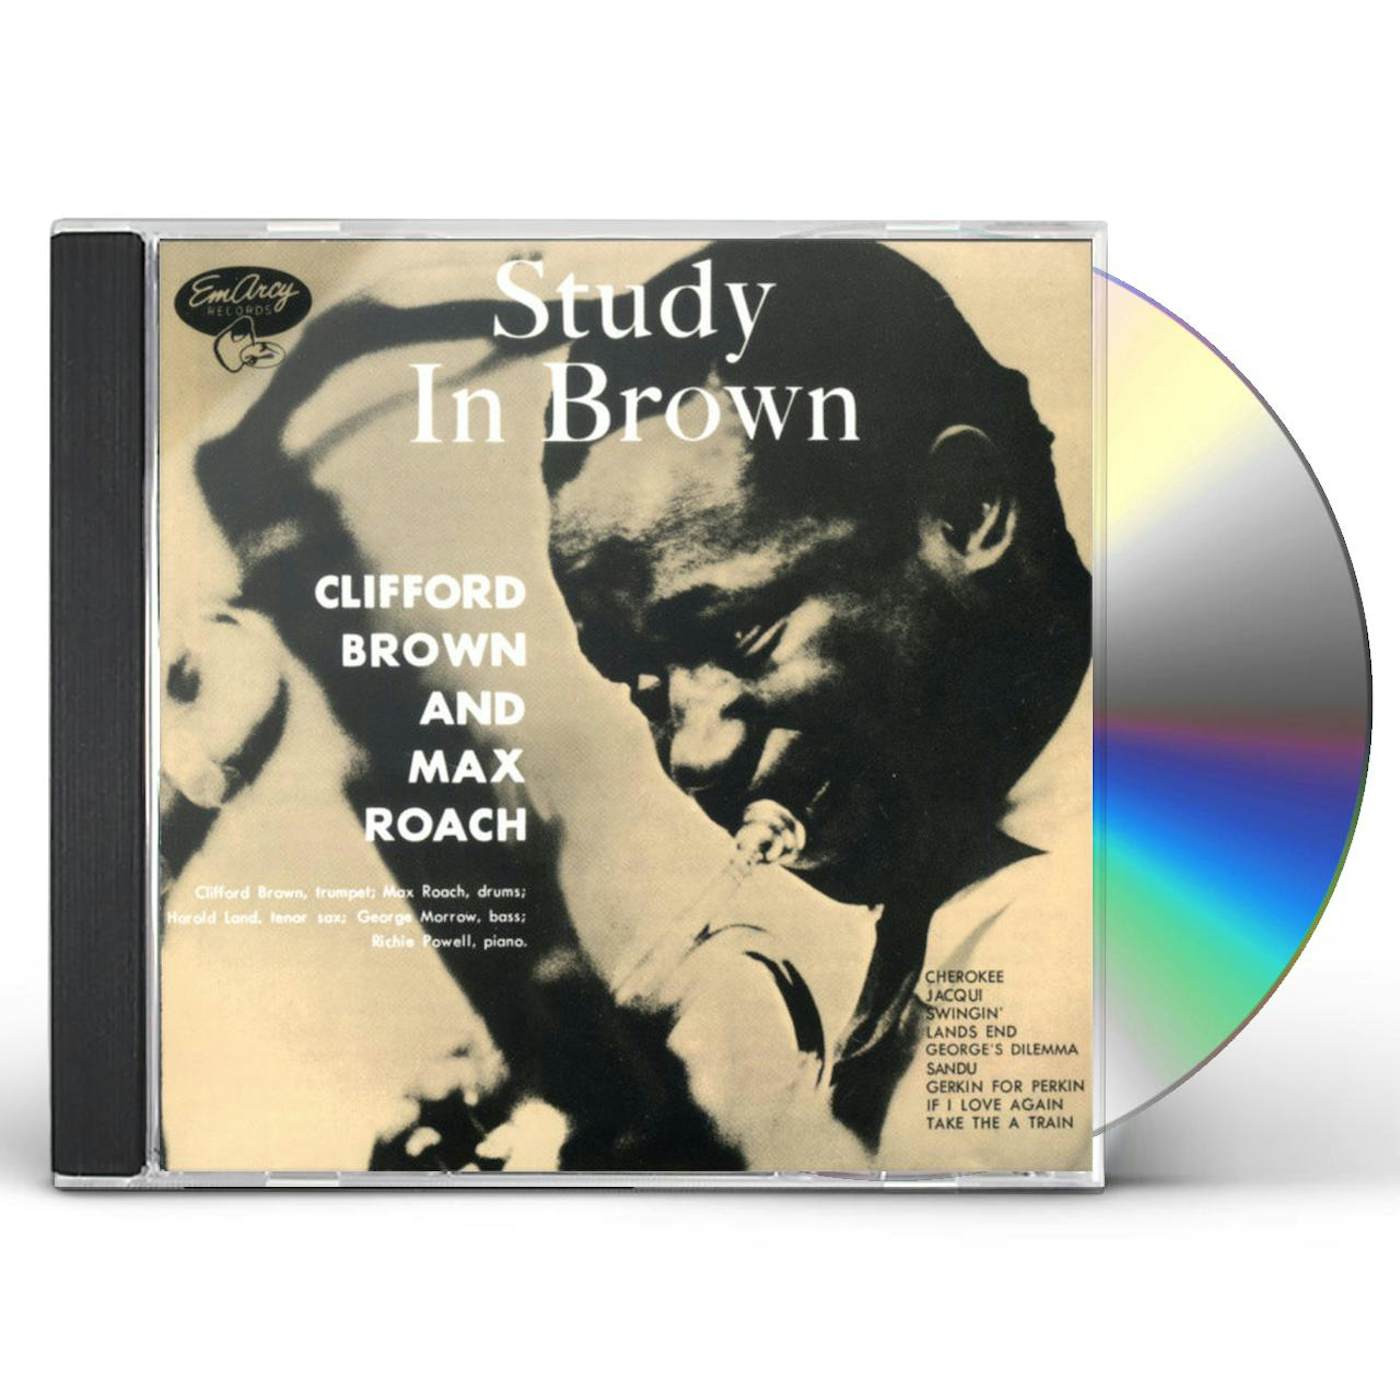 Clifford Brown & Max Roach STUDY IN BROWN CD